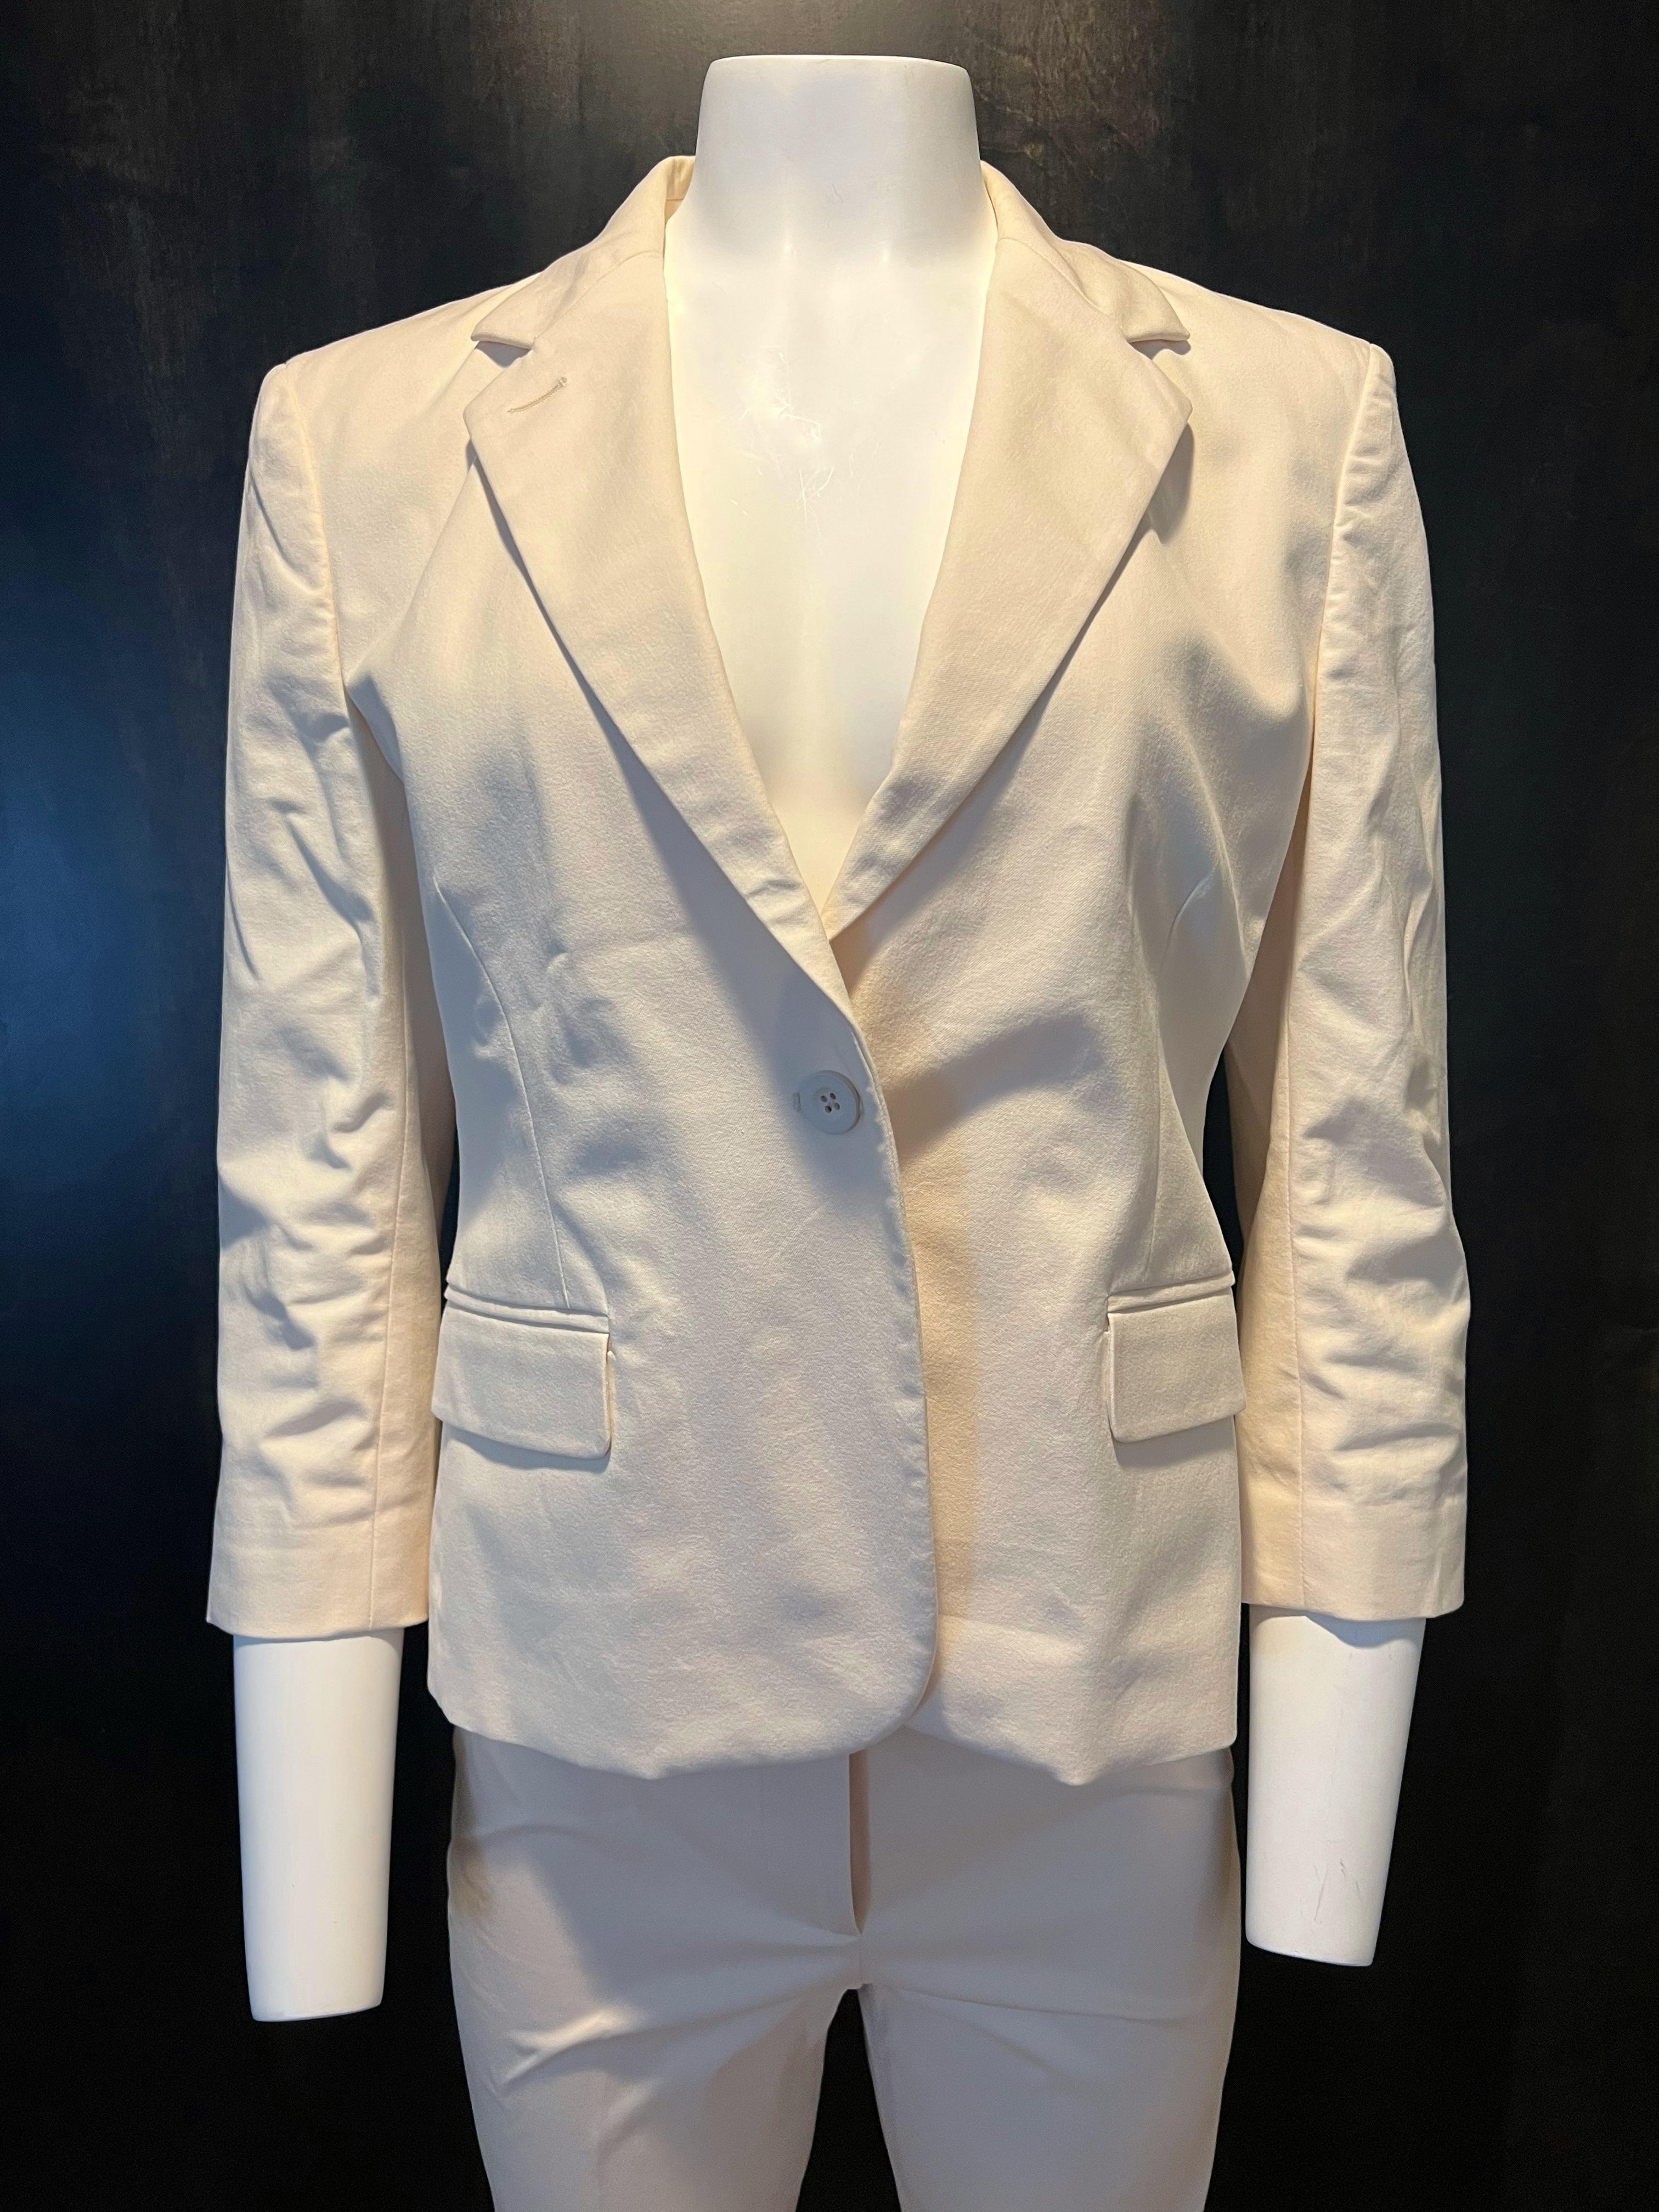 The blazer, size 46
- Collar
- Front button closure
- 3/4 sleeves length
- Side pockets detail
- Deep v- neck closure
Measurements: length- 24, bust- 38,5, waist- 35, hips- 40 

Pants, size 42
- Low raise
- Straight leg
- Side pockets
- Cropped